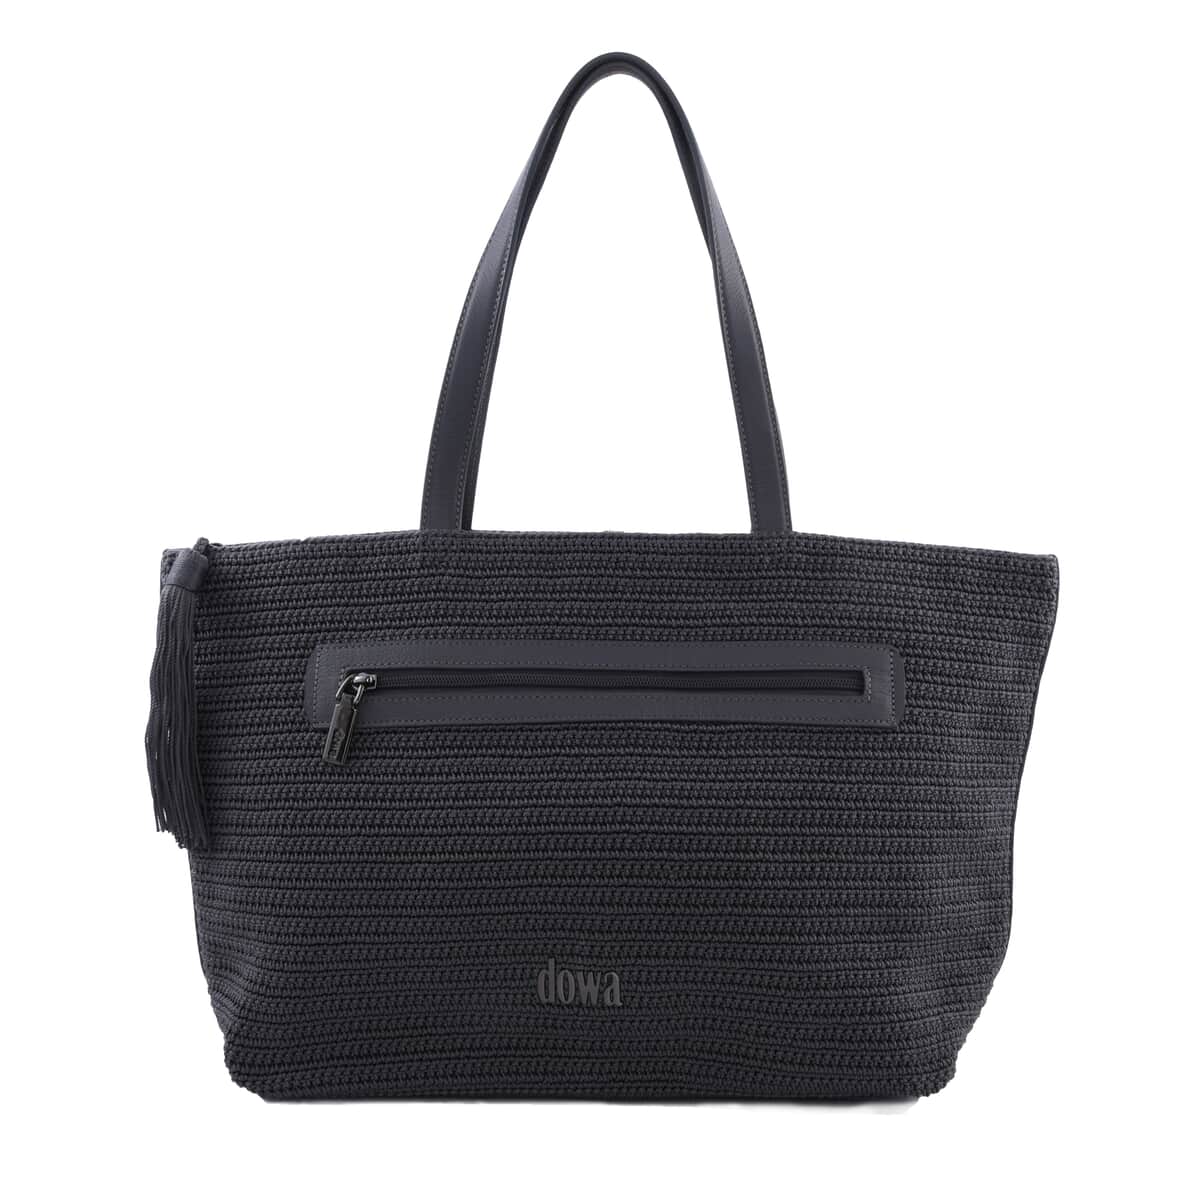 Dowa Gray 100% Nylon with Leather Handwoven Tote Bag image number 0